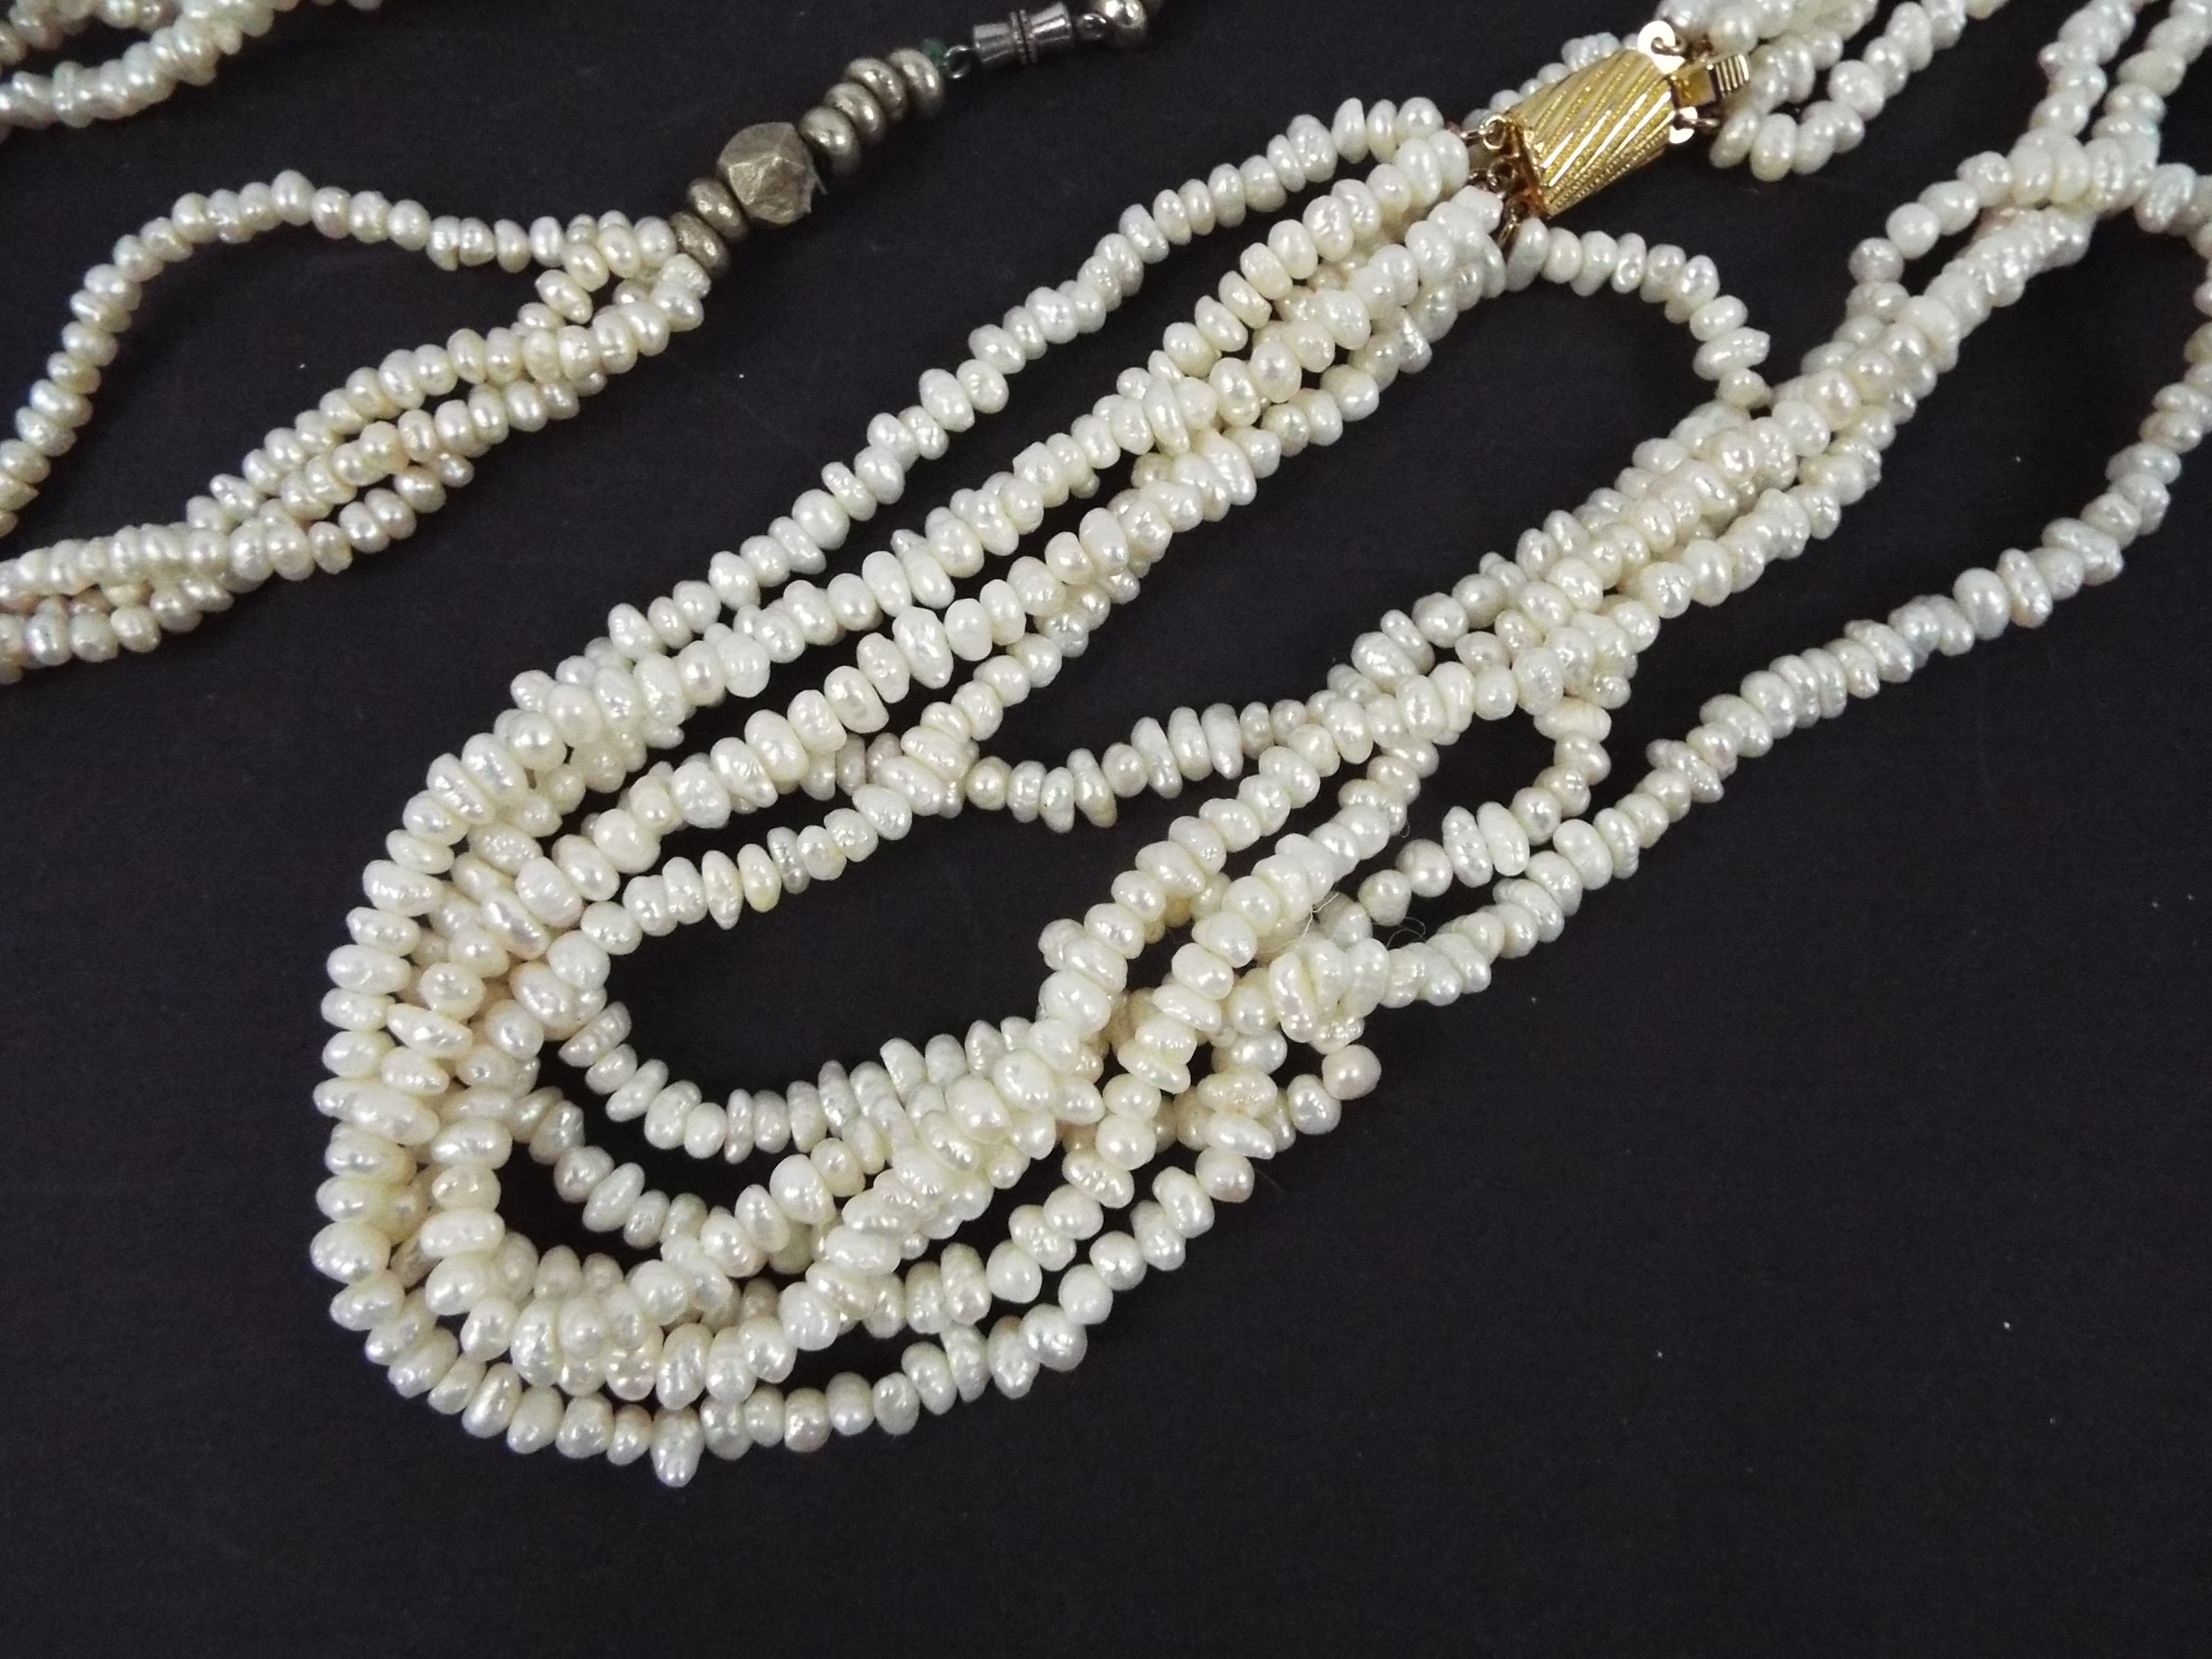 Two multi-strand necklaces, one with gilt metal clasp, longest 47 cm. - Image 2 of 5